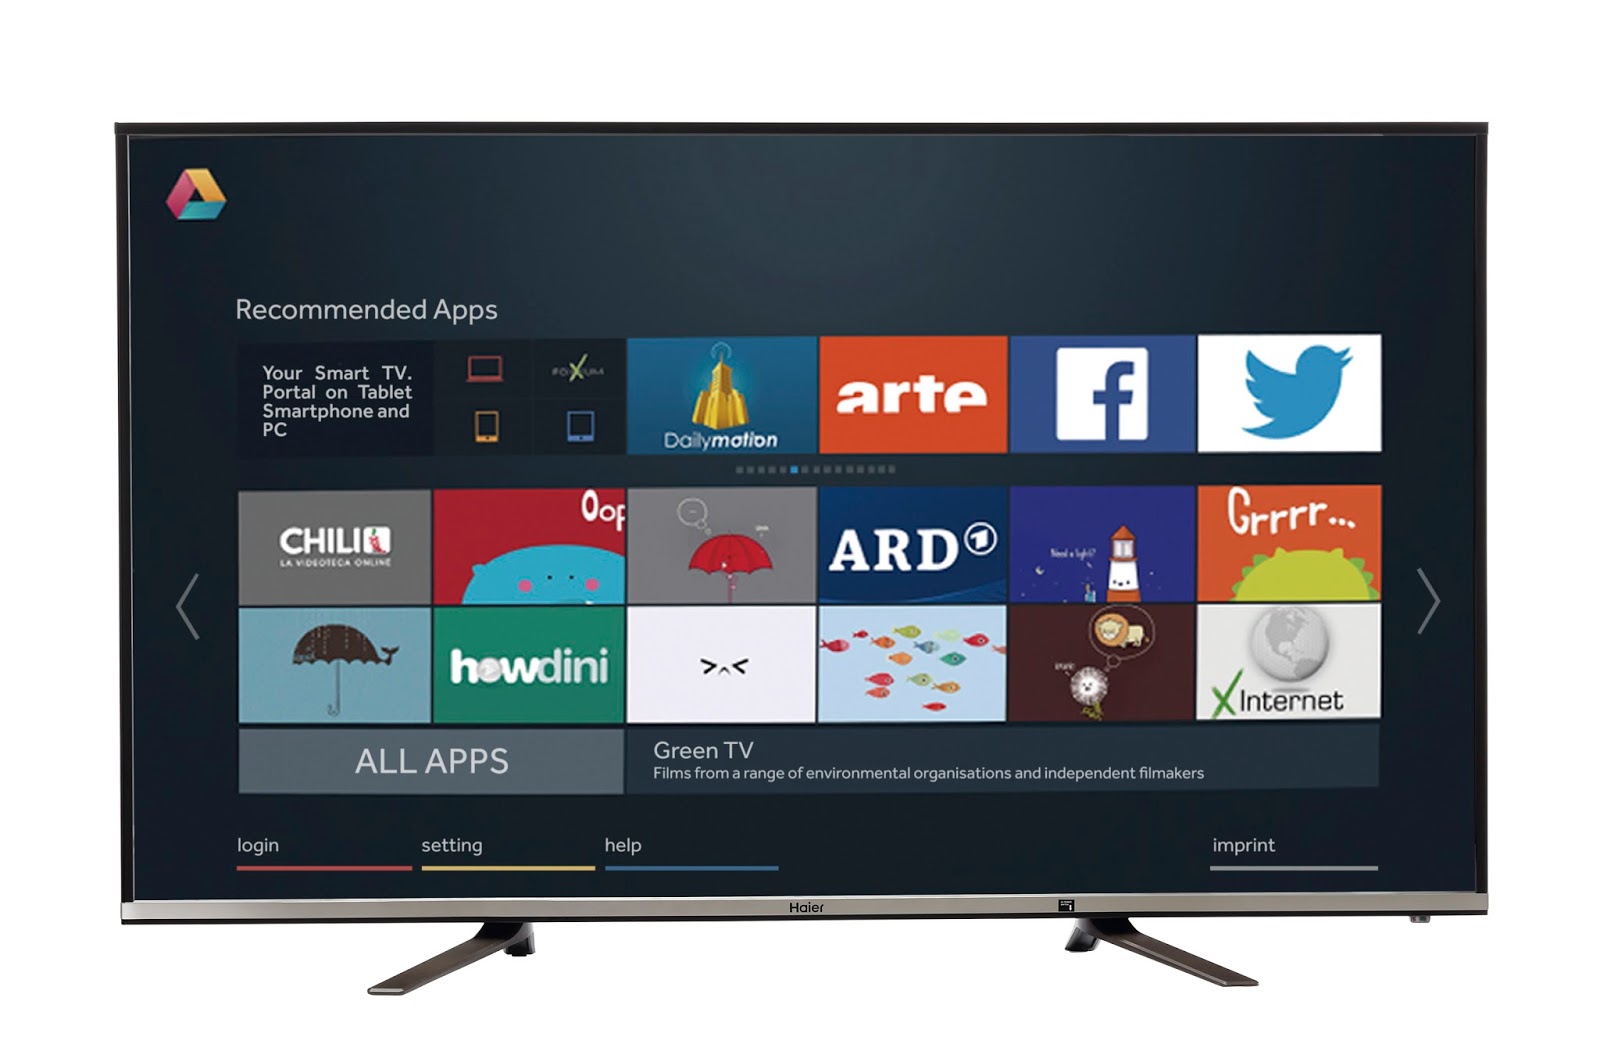 Haier offers a larger, wider and smarter choice through U5000A Android TV- Haier Philippines